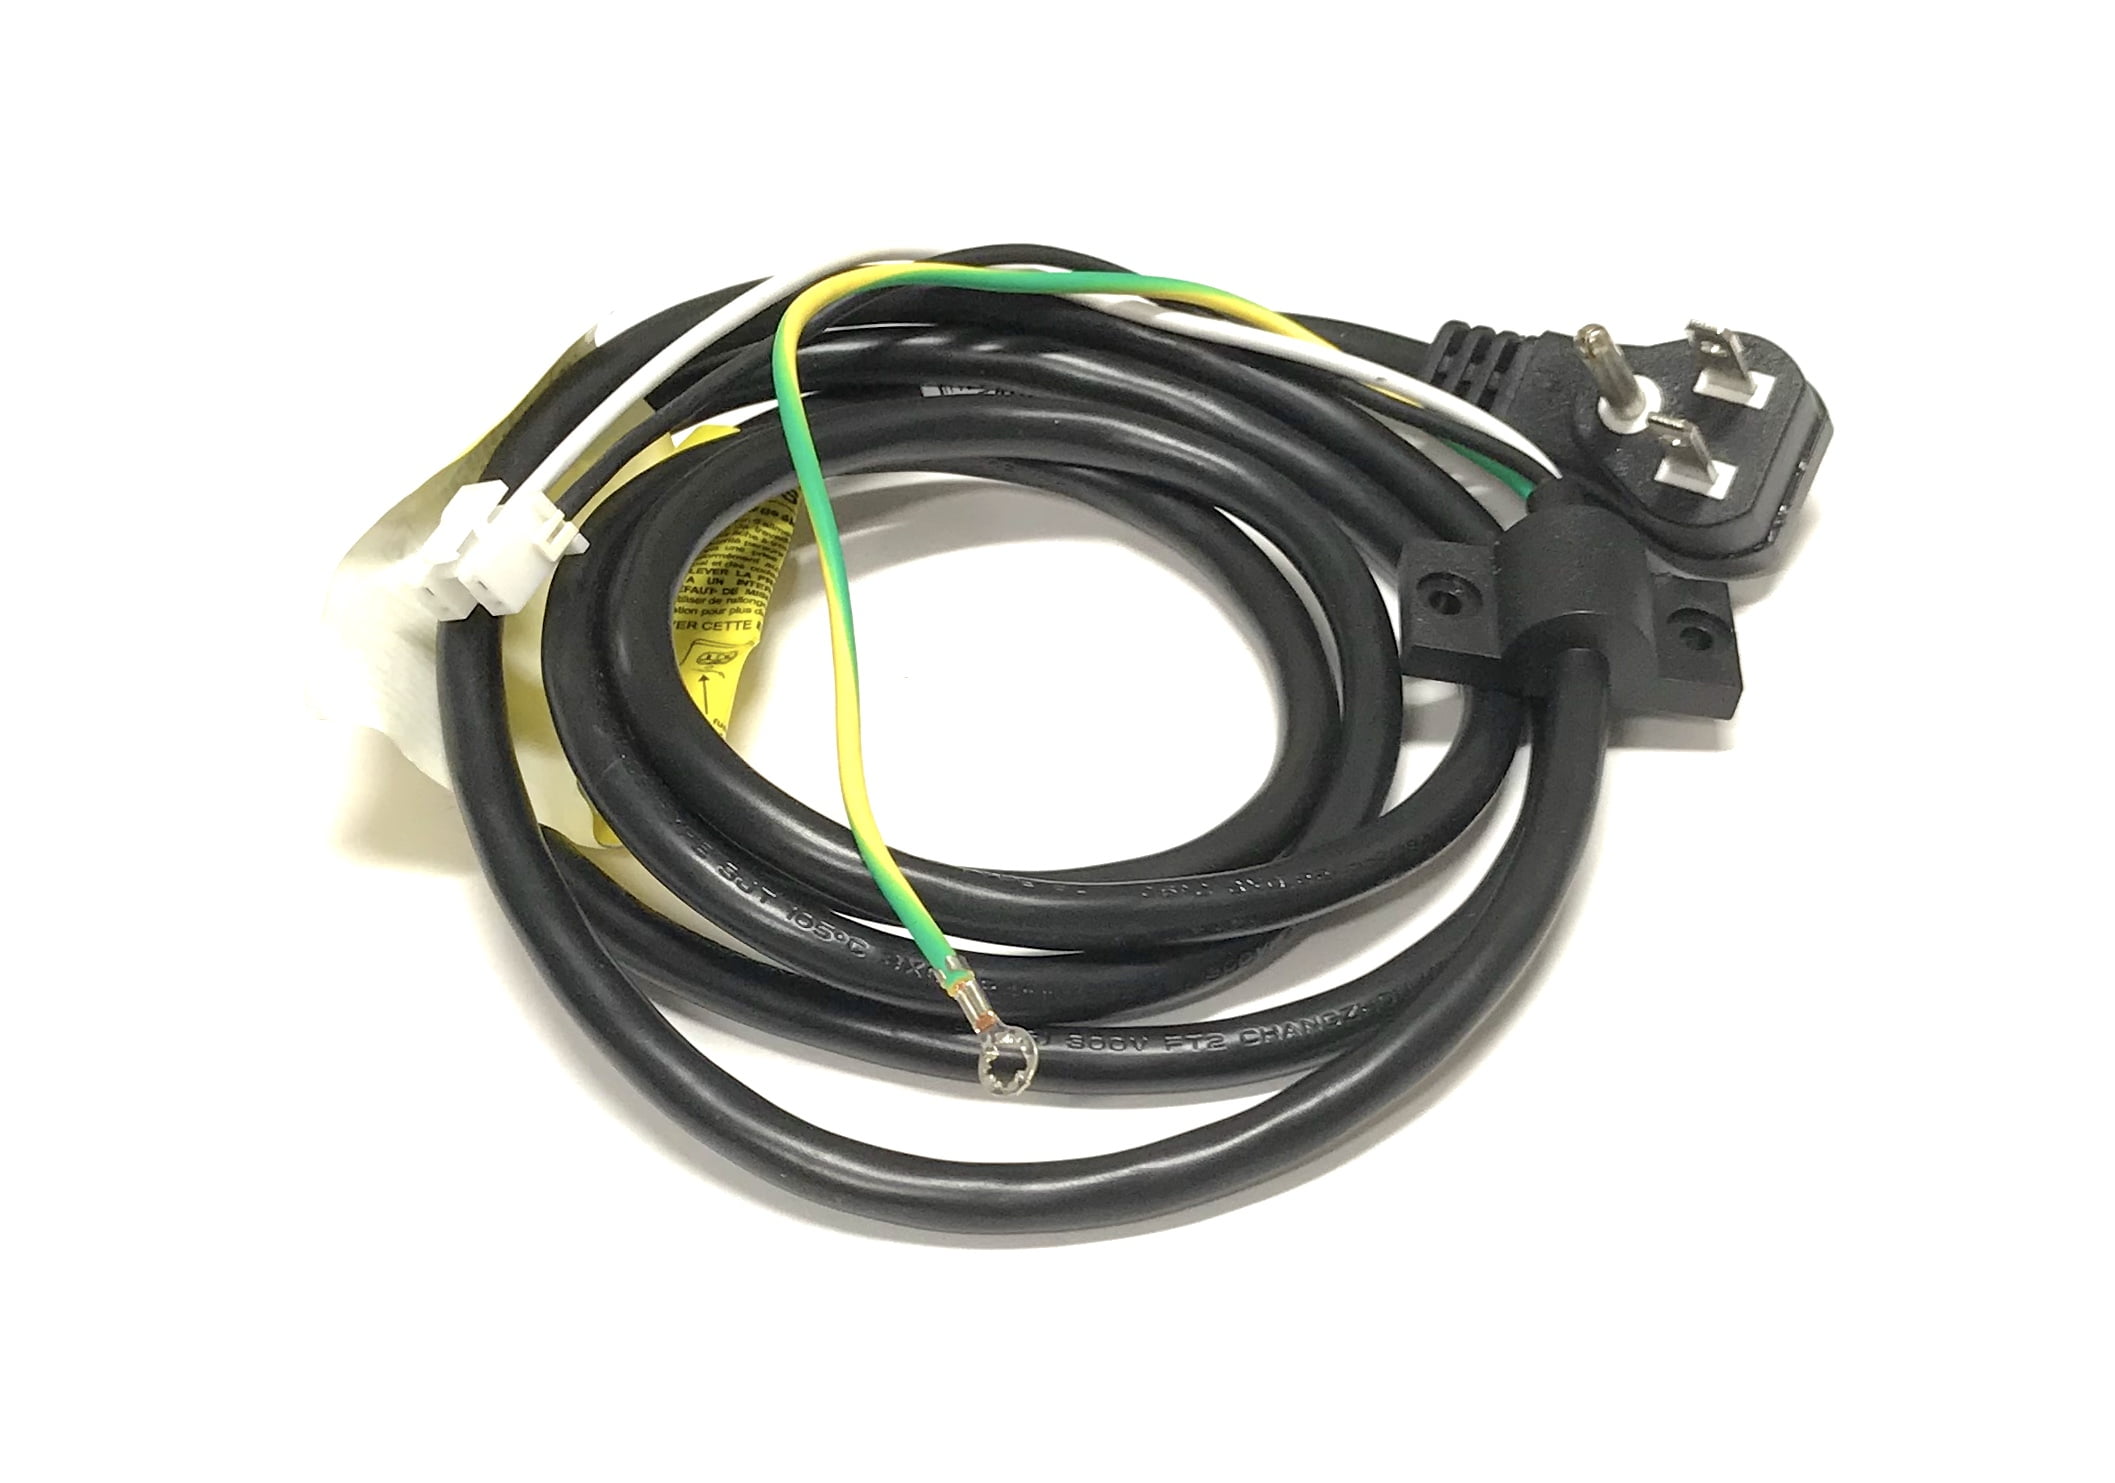 A/C Power Cord Cable Plug for LG 75UK6190PUB 